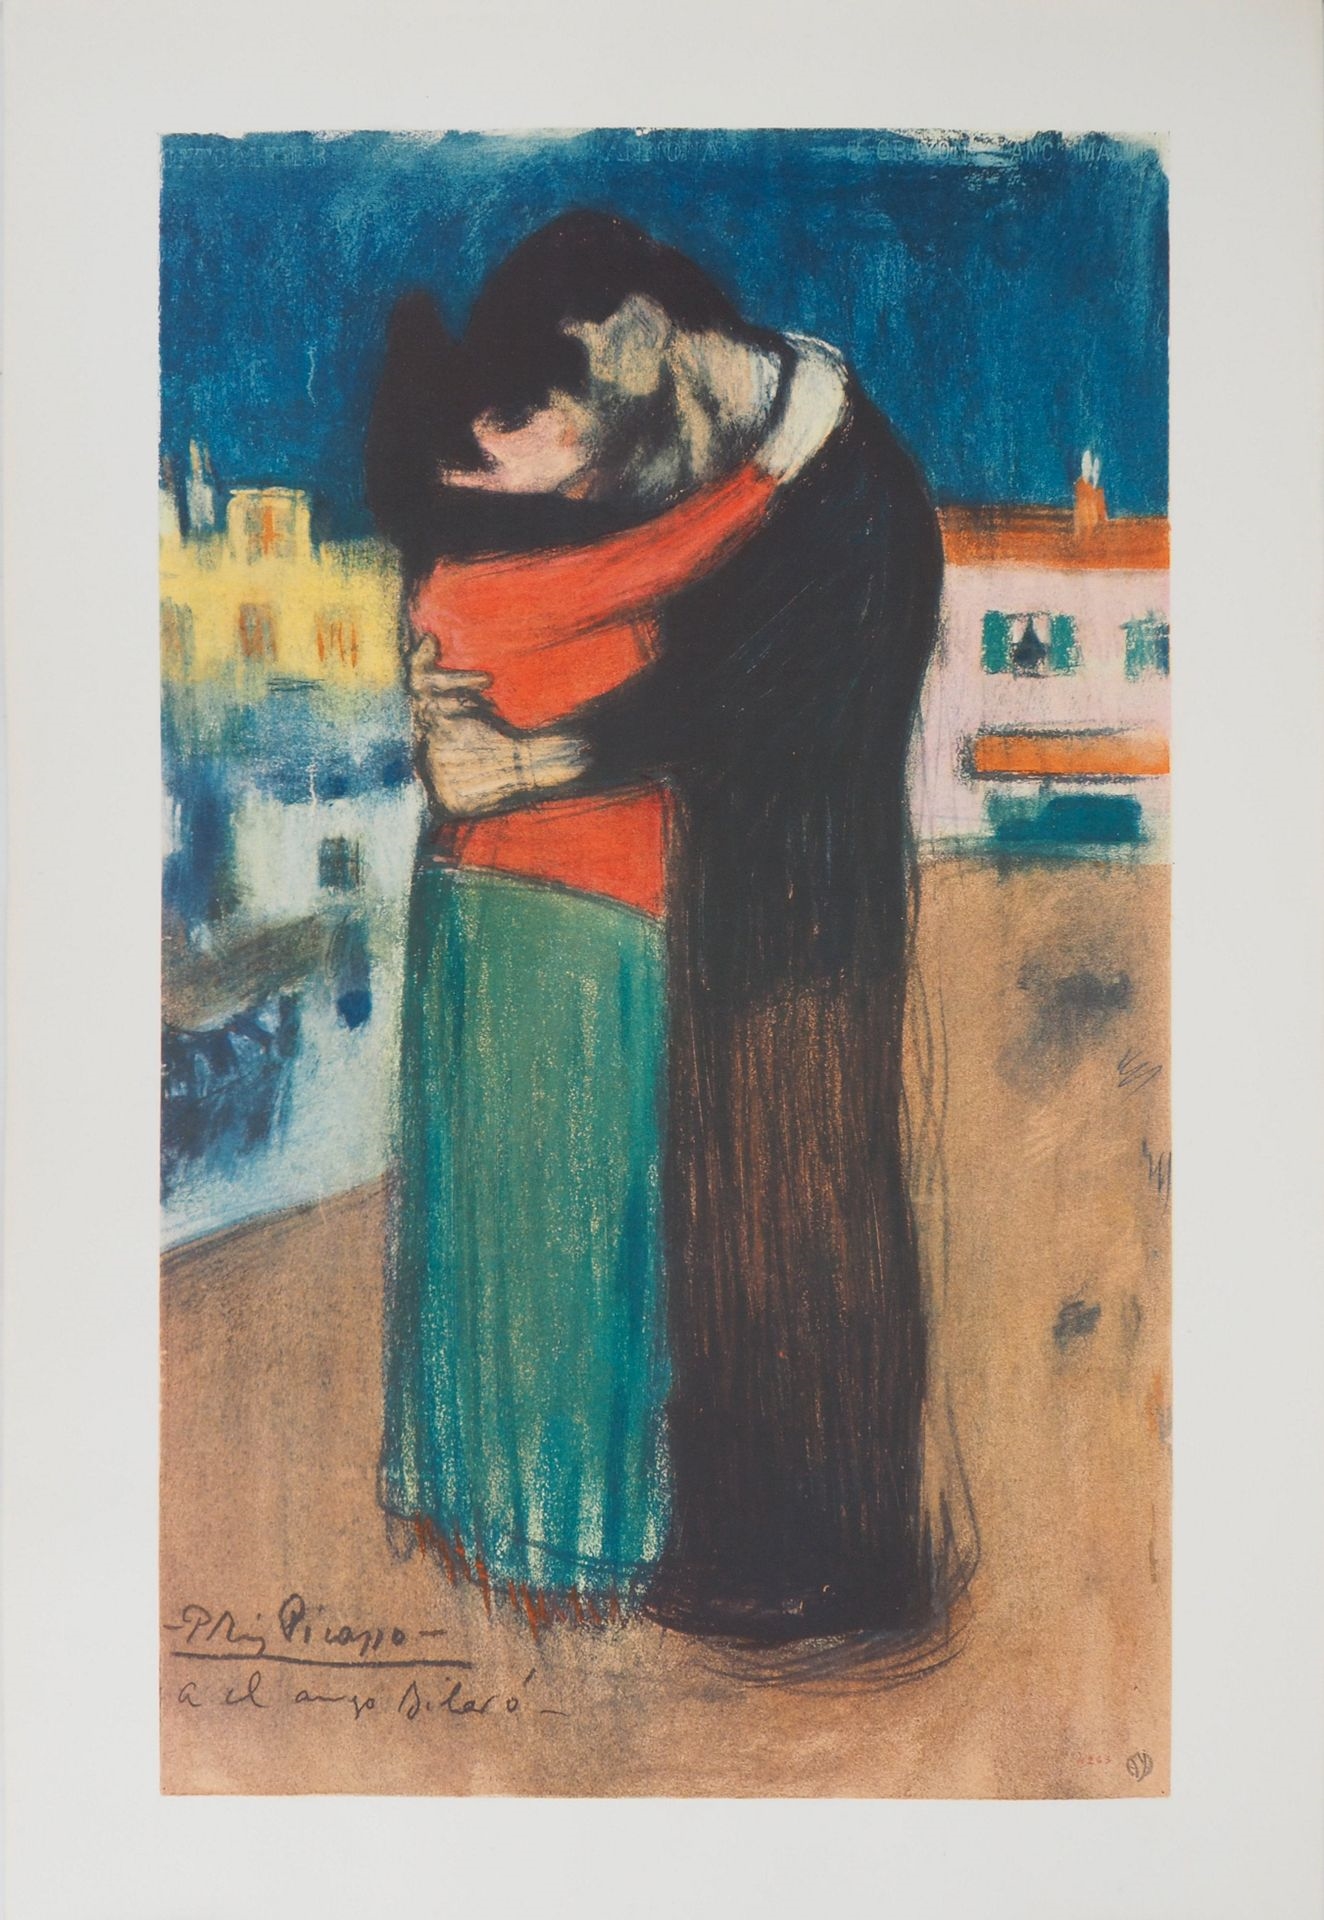 Tribute to Toulouse-Lautrec: Couple in love by Pablo Picasso, c. 1960